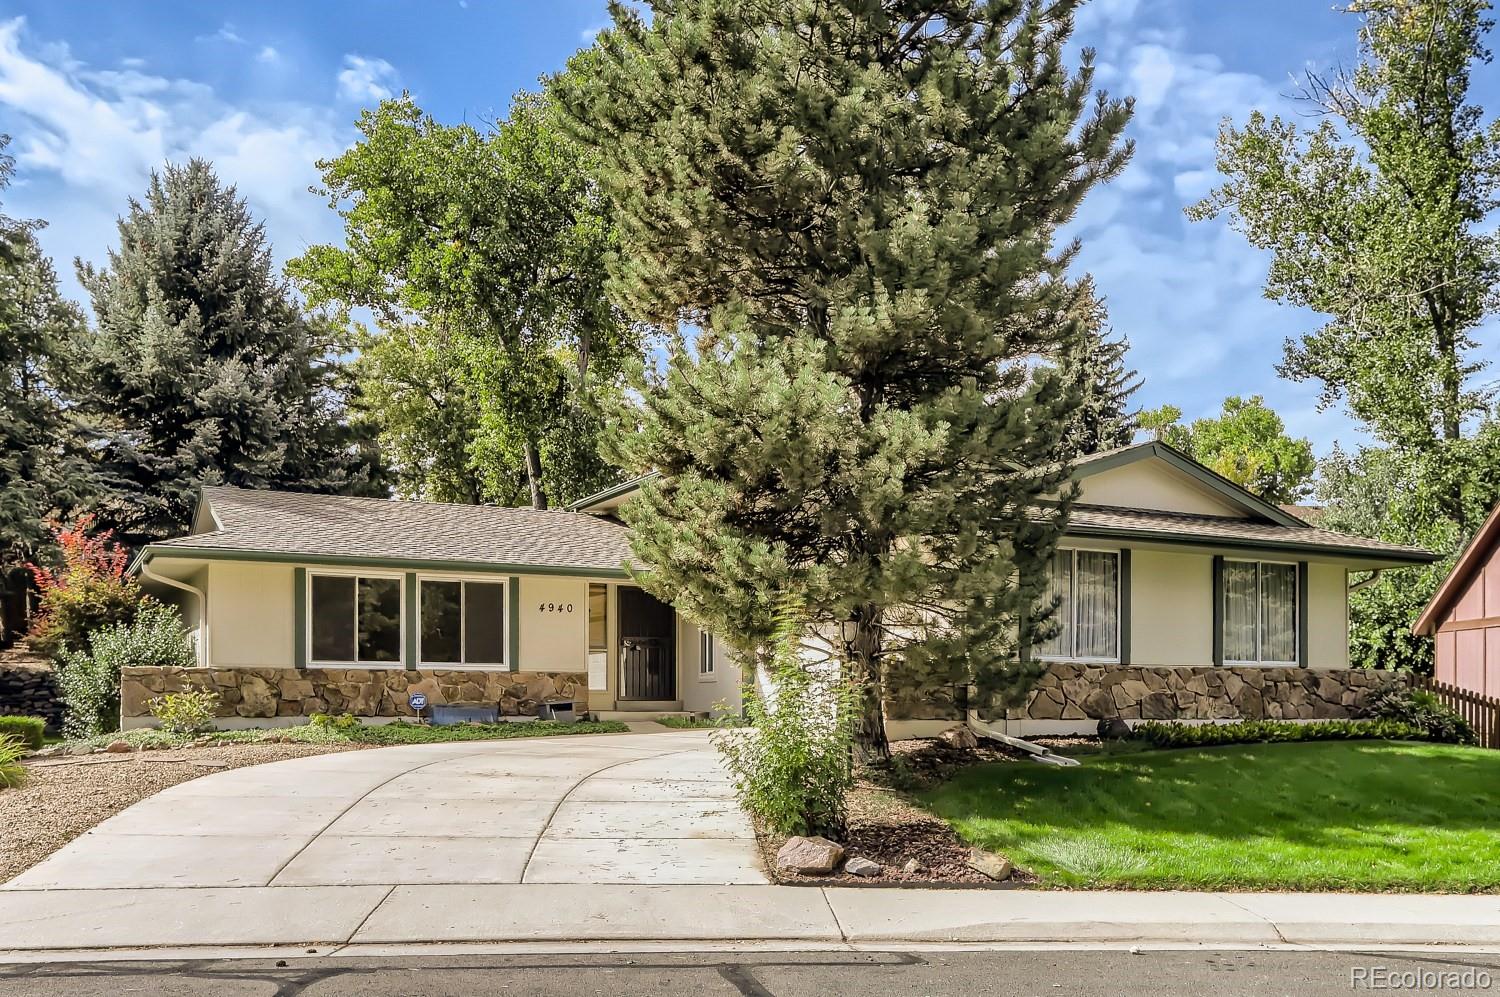 4940 101st, Westminster, CO